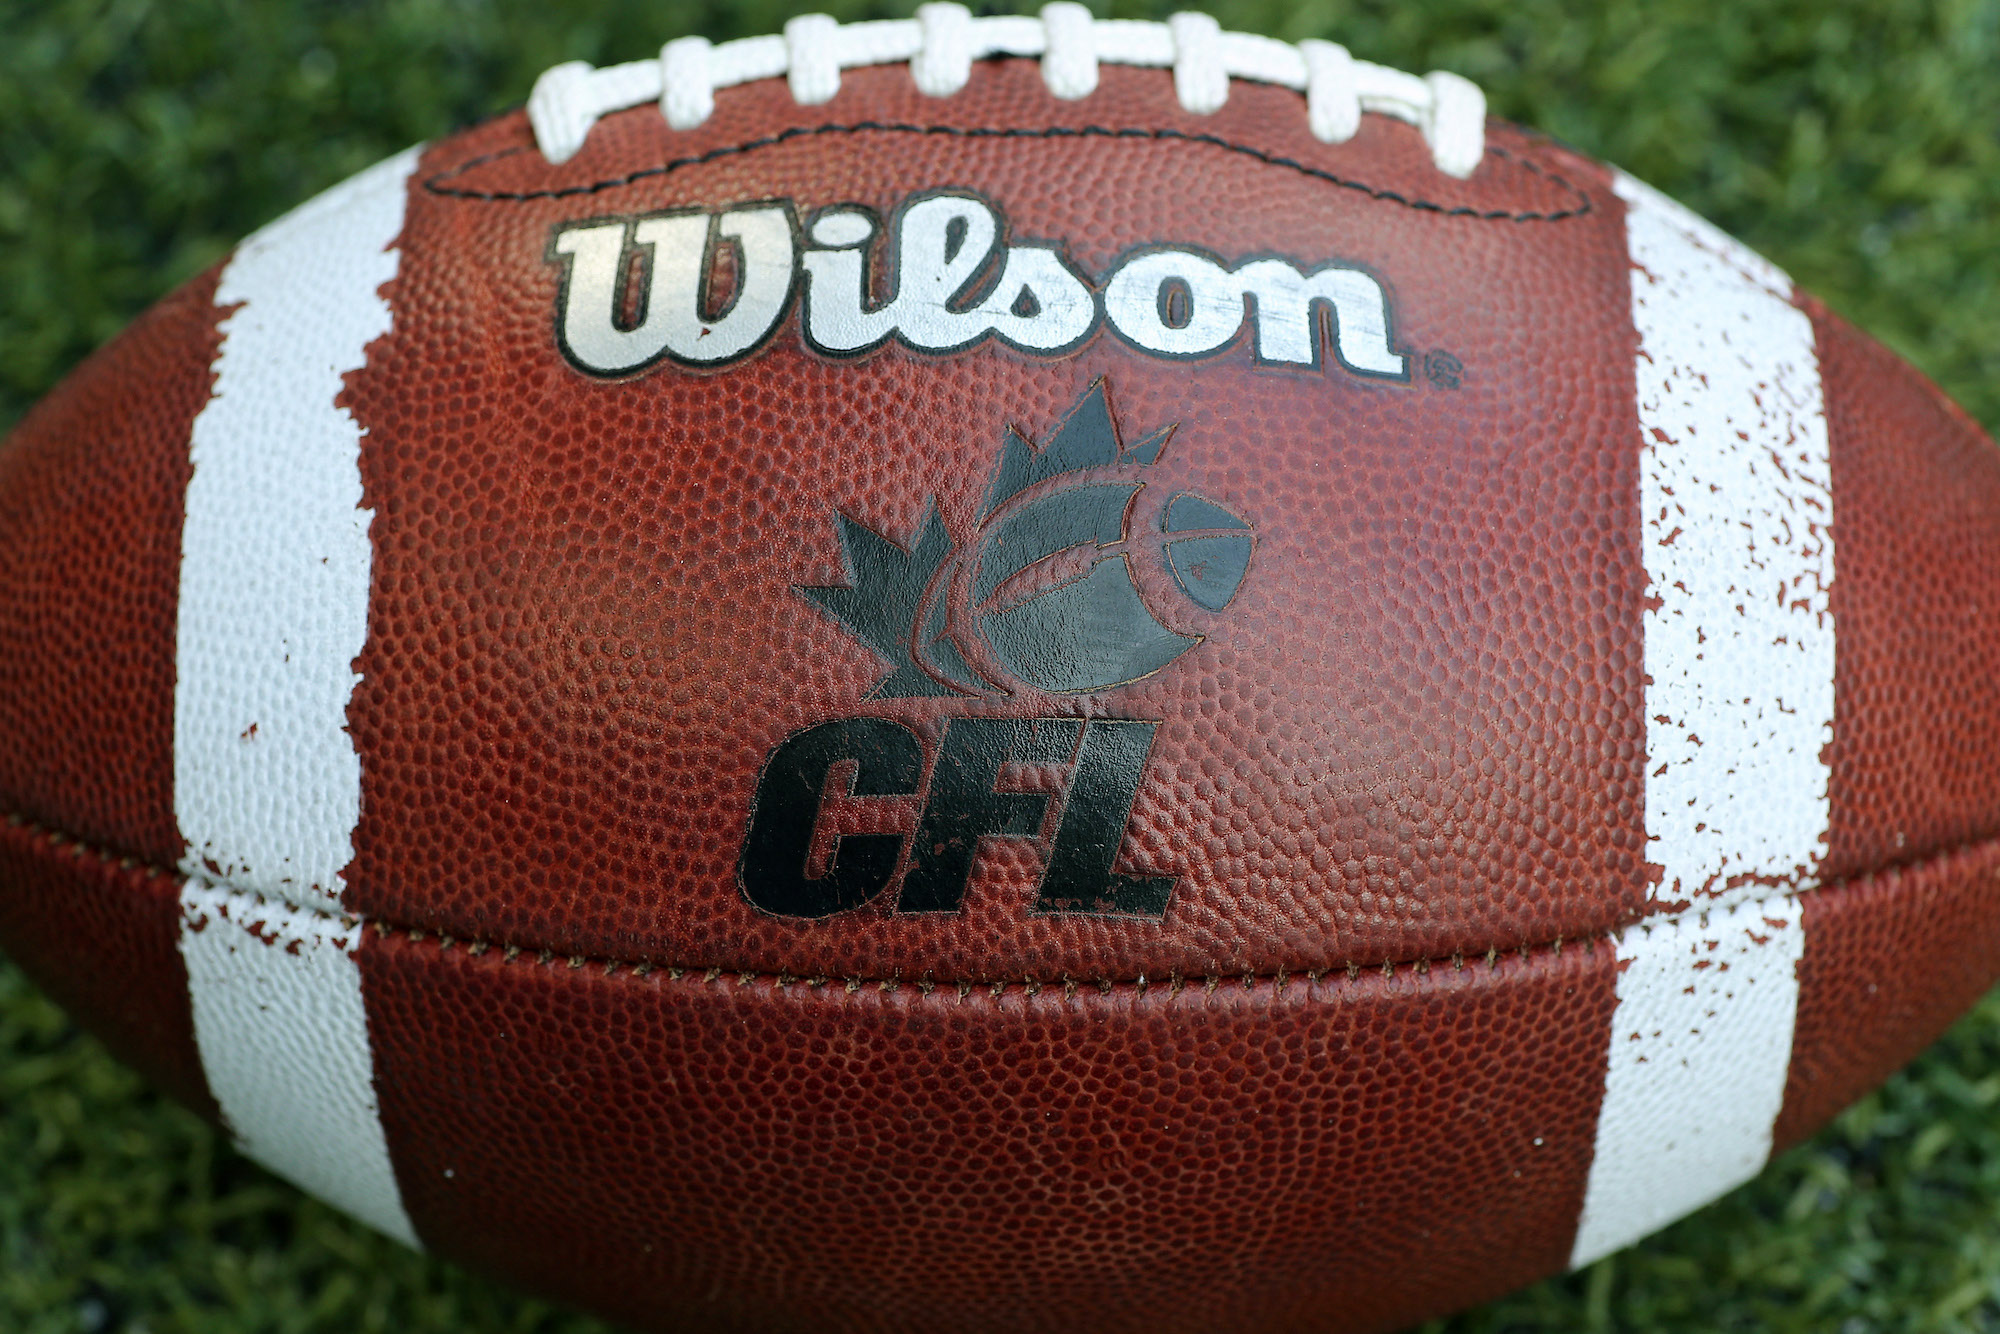 I rebranded the entire CFL (including the Schooners). In hopes to